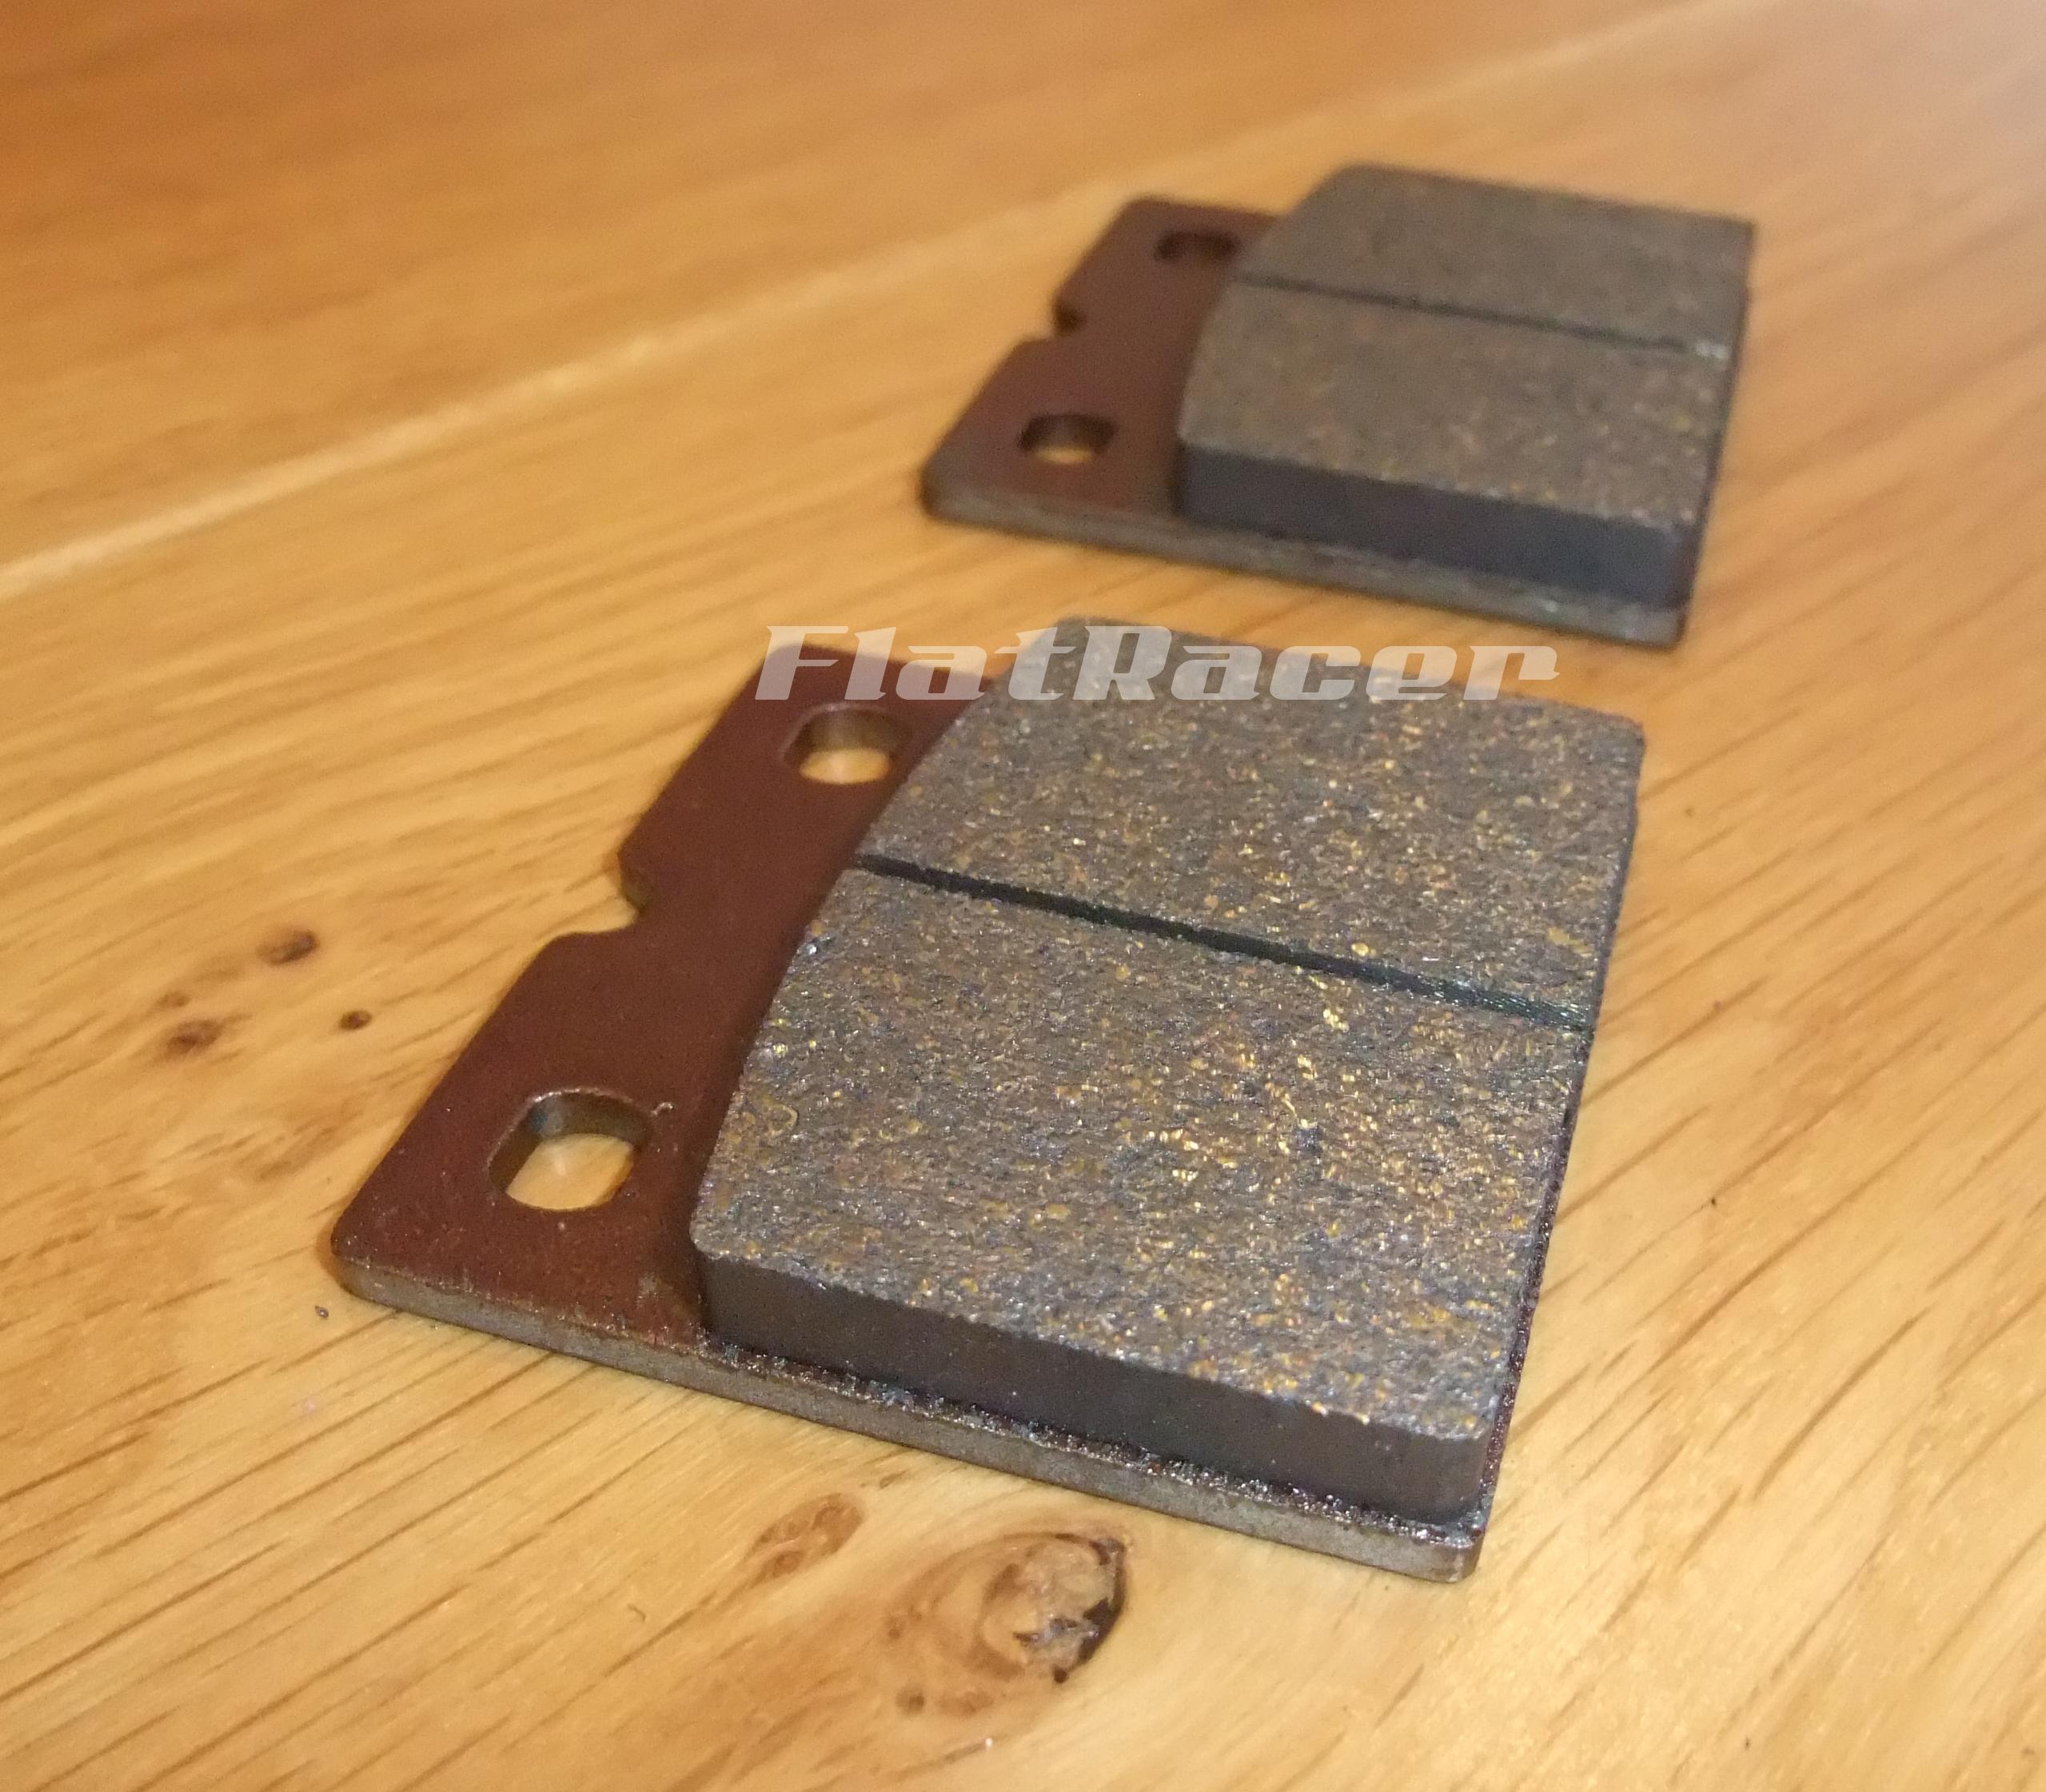 BMW /7 Series & early Monolever (1981 - Aug 88) Ferodo FDB108P front brake pads